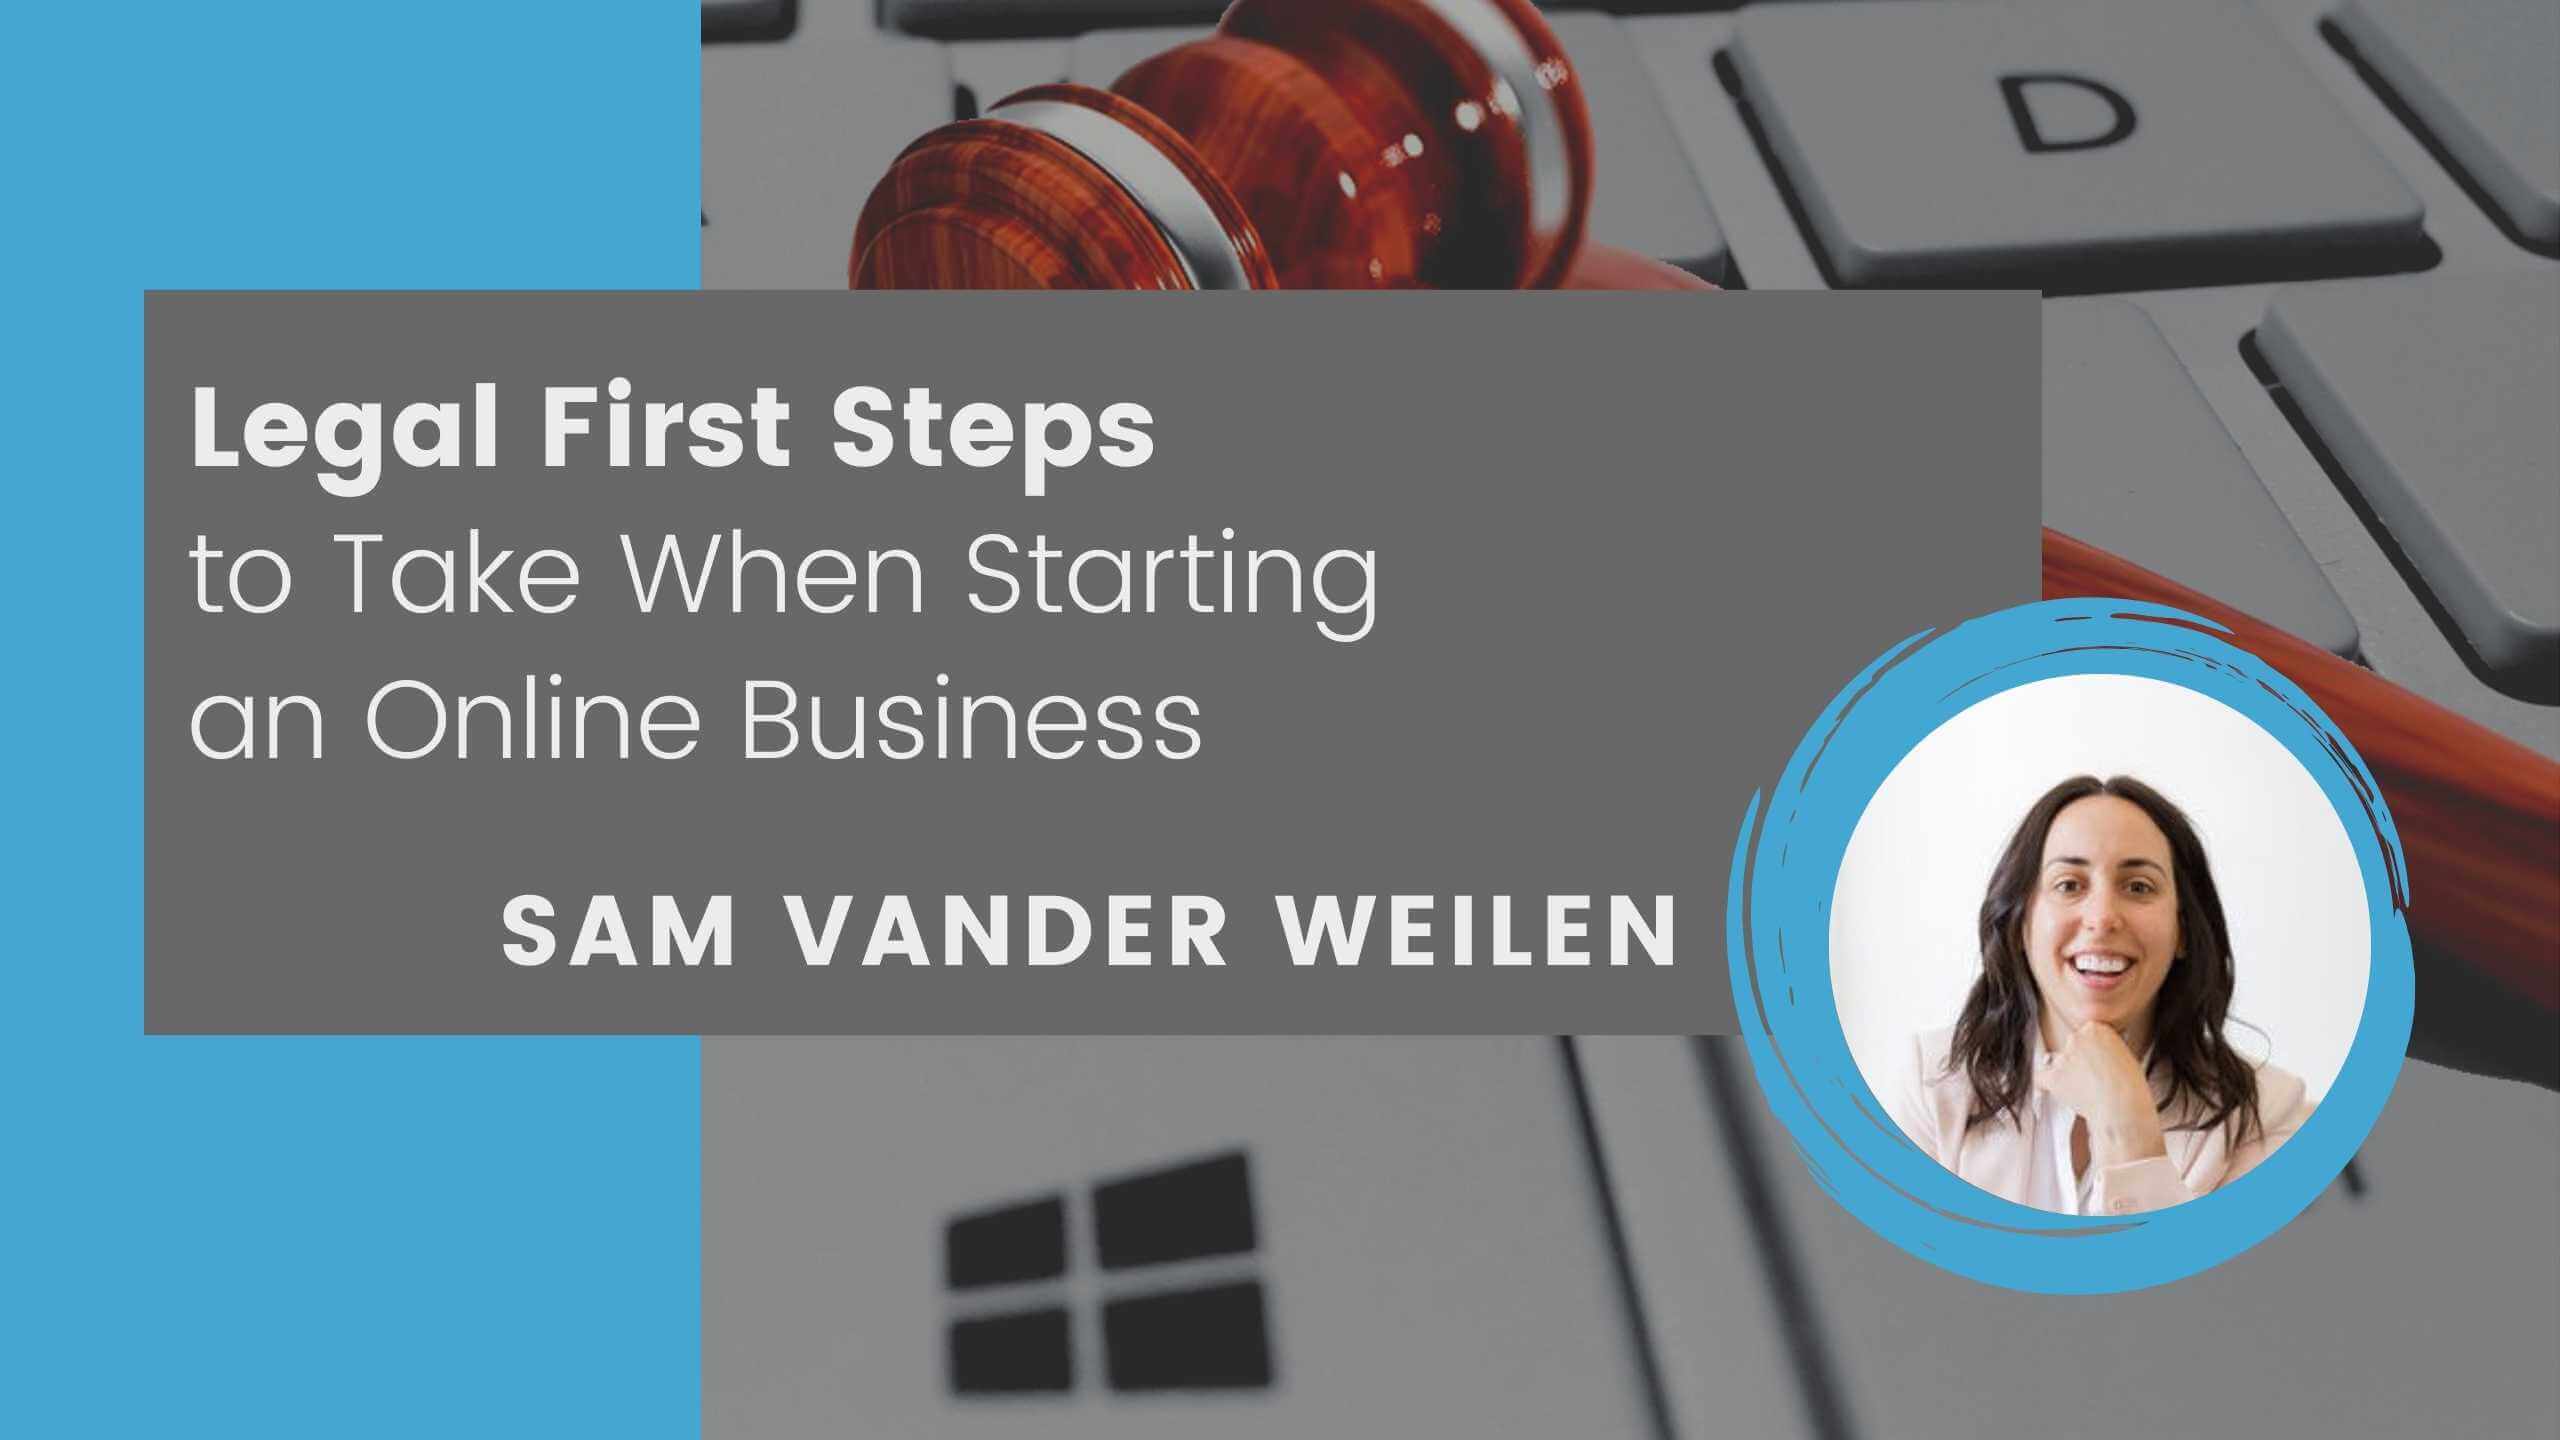 How to Reduce Your Business Costs, Sam Vander Wielen, DIY Legal Templates  for Online Businesses